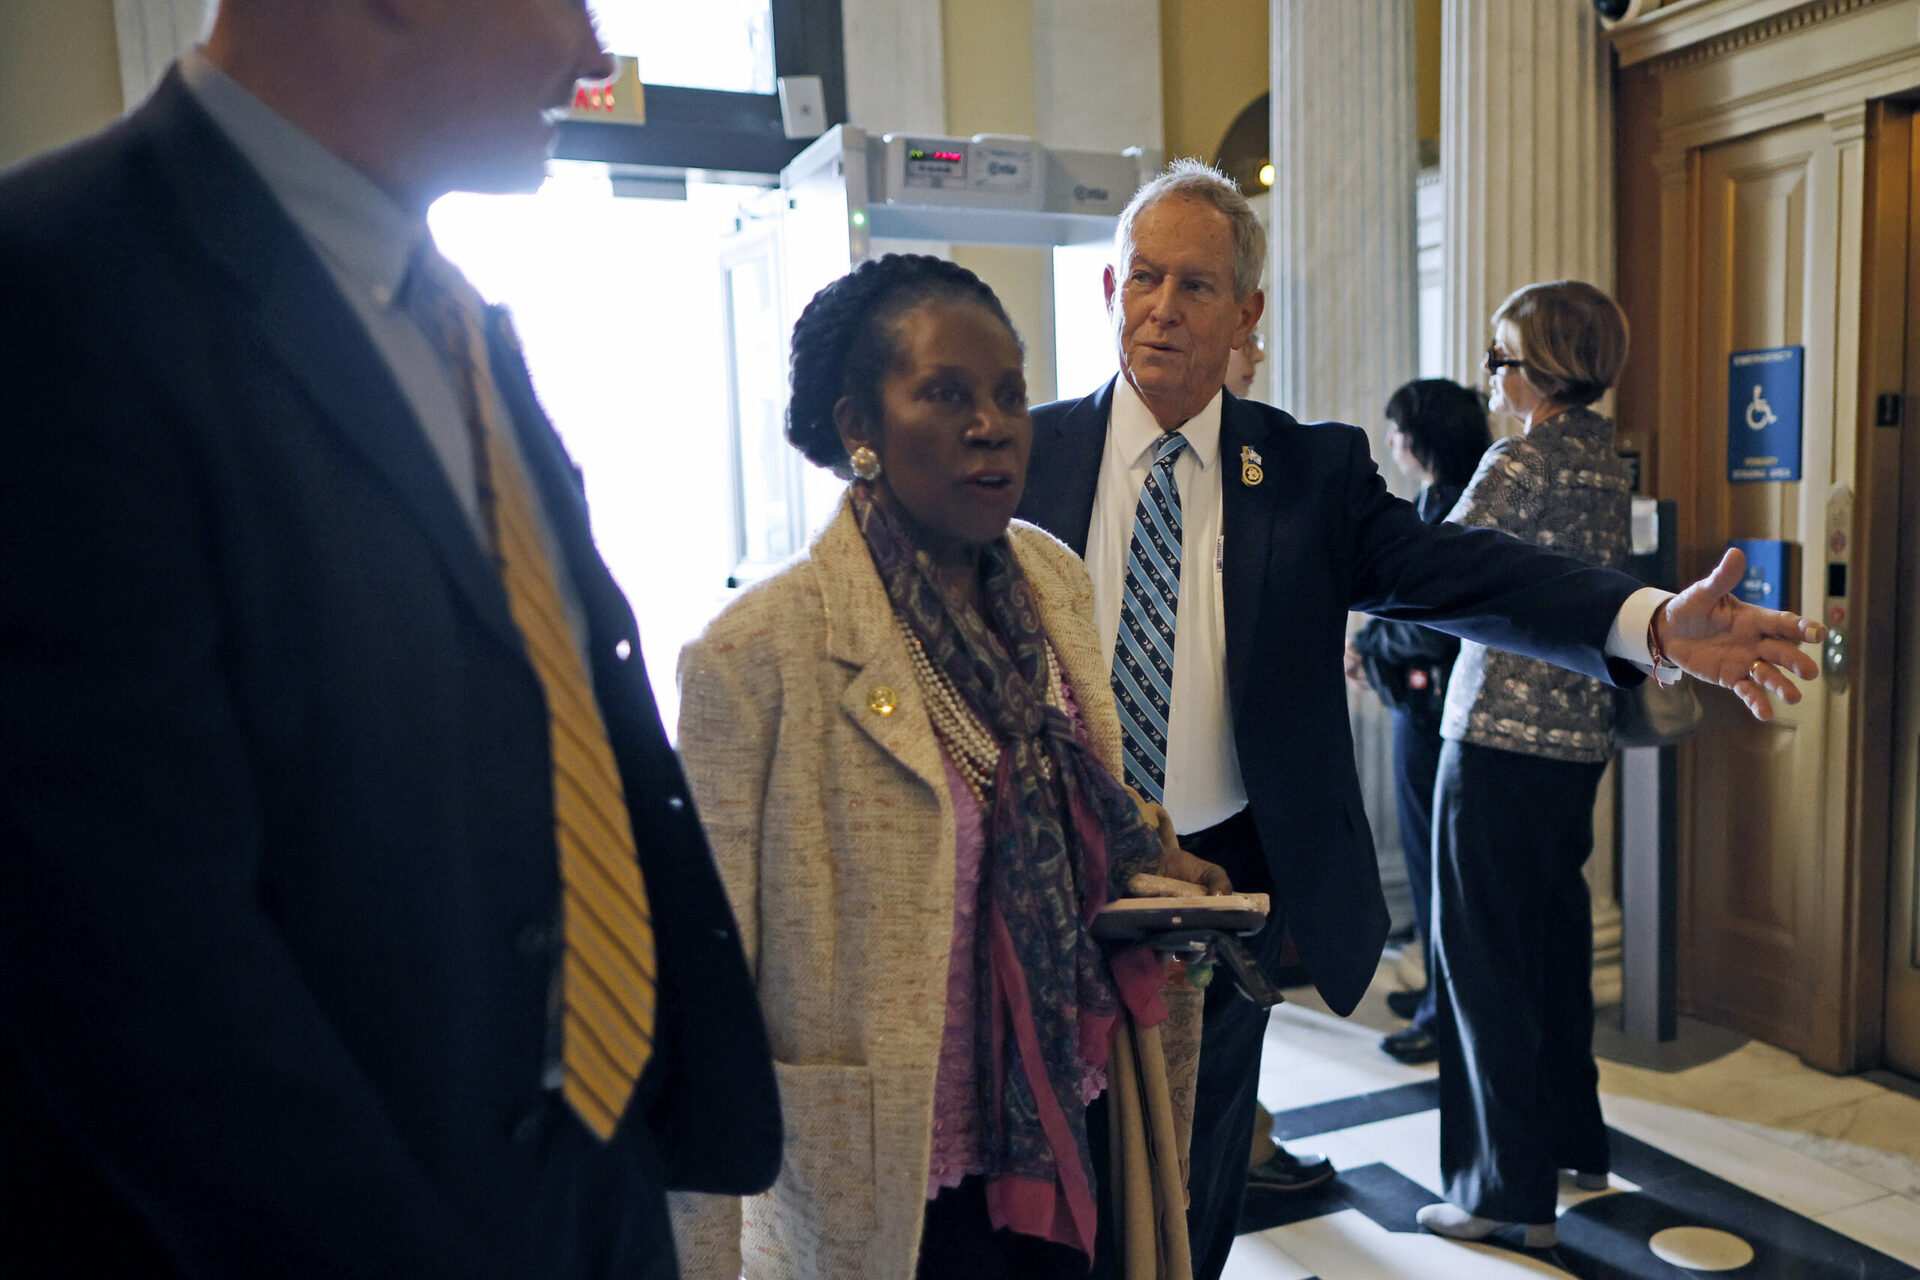 Texas Rep. Sheila Jackson Lee reveals cancer, expects to miss votes in divided chamber